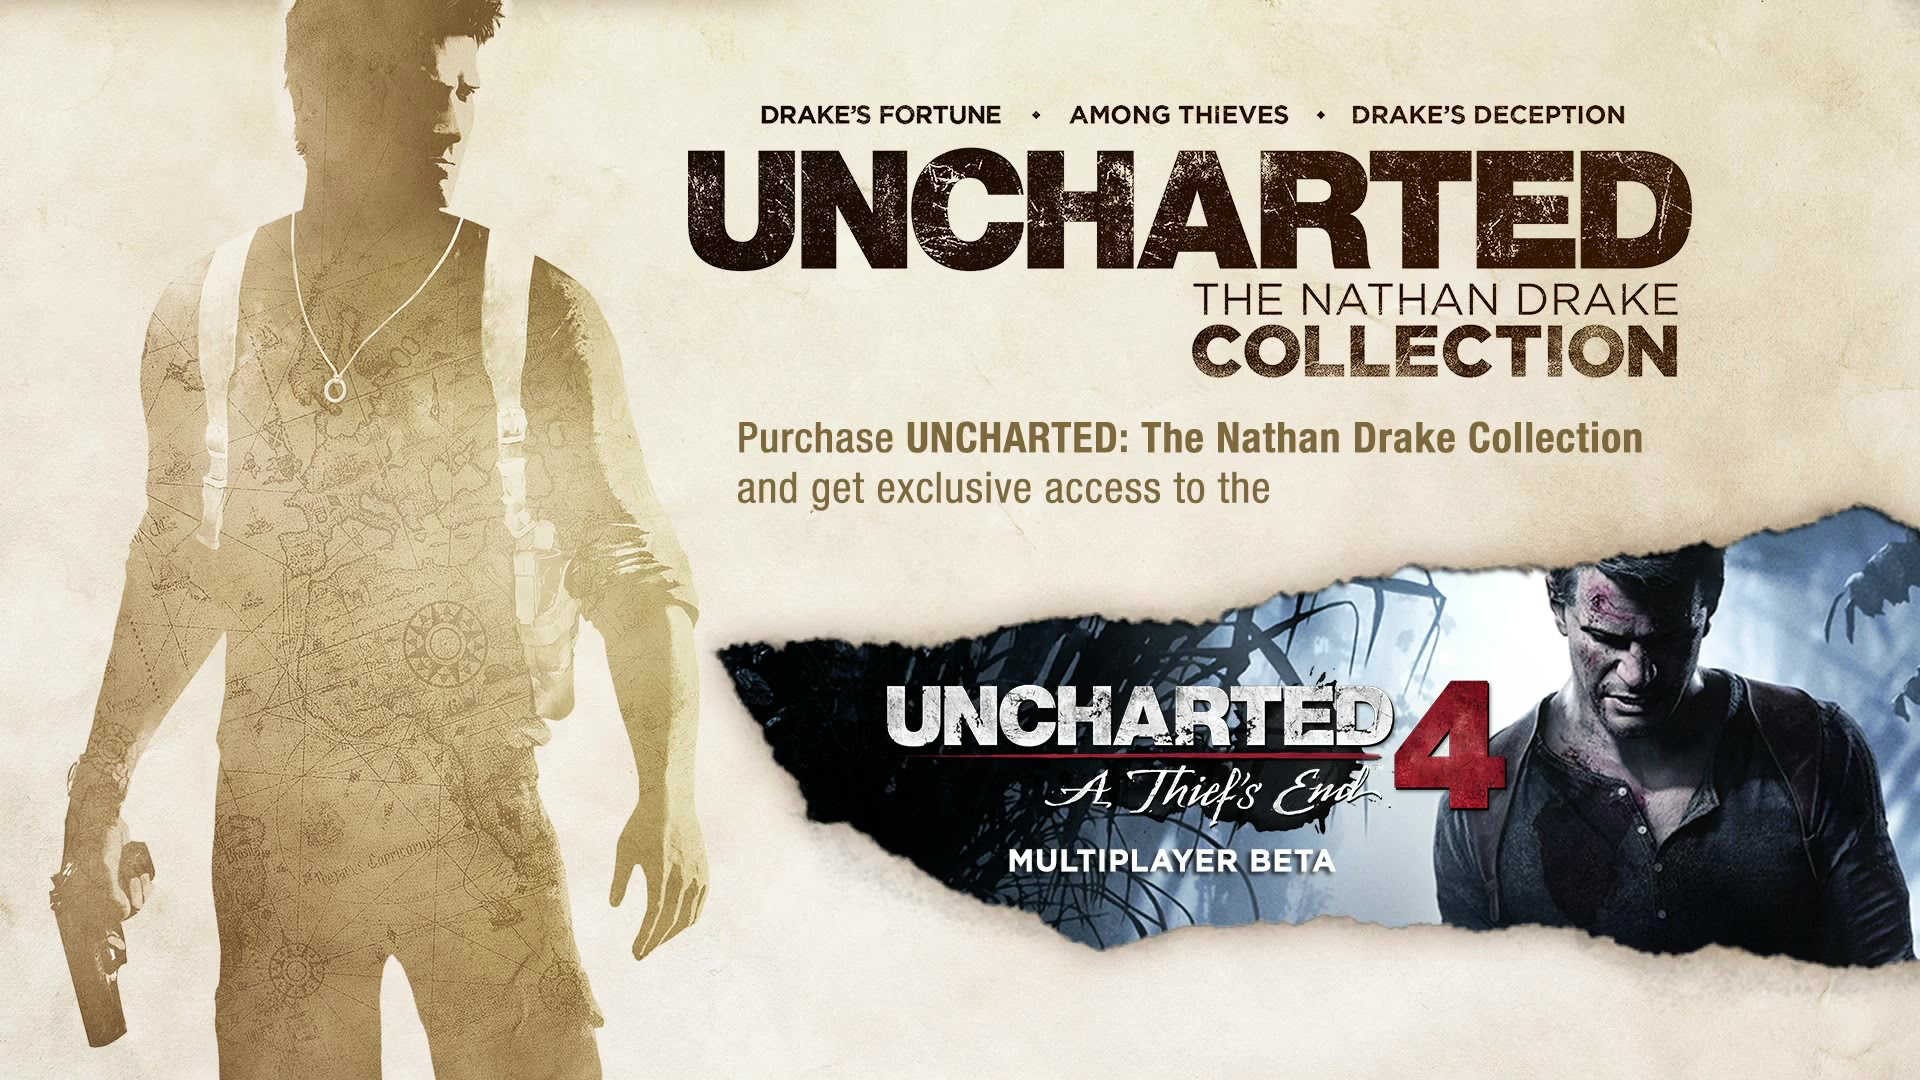 Tại sao "Uncharted: The Nathan Drake Collection" thiếu vắng bản "Golden Abyss"?